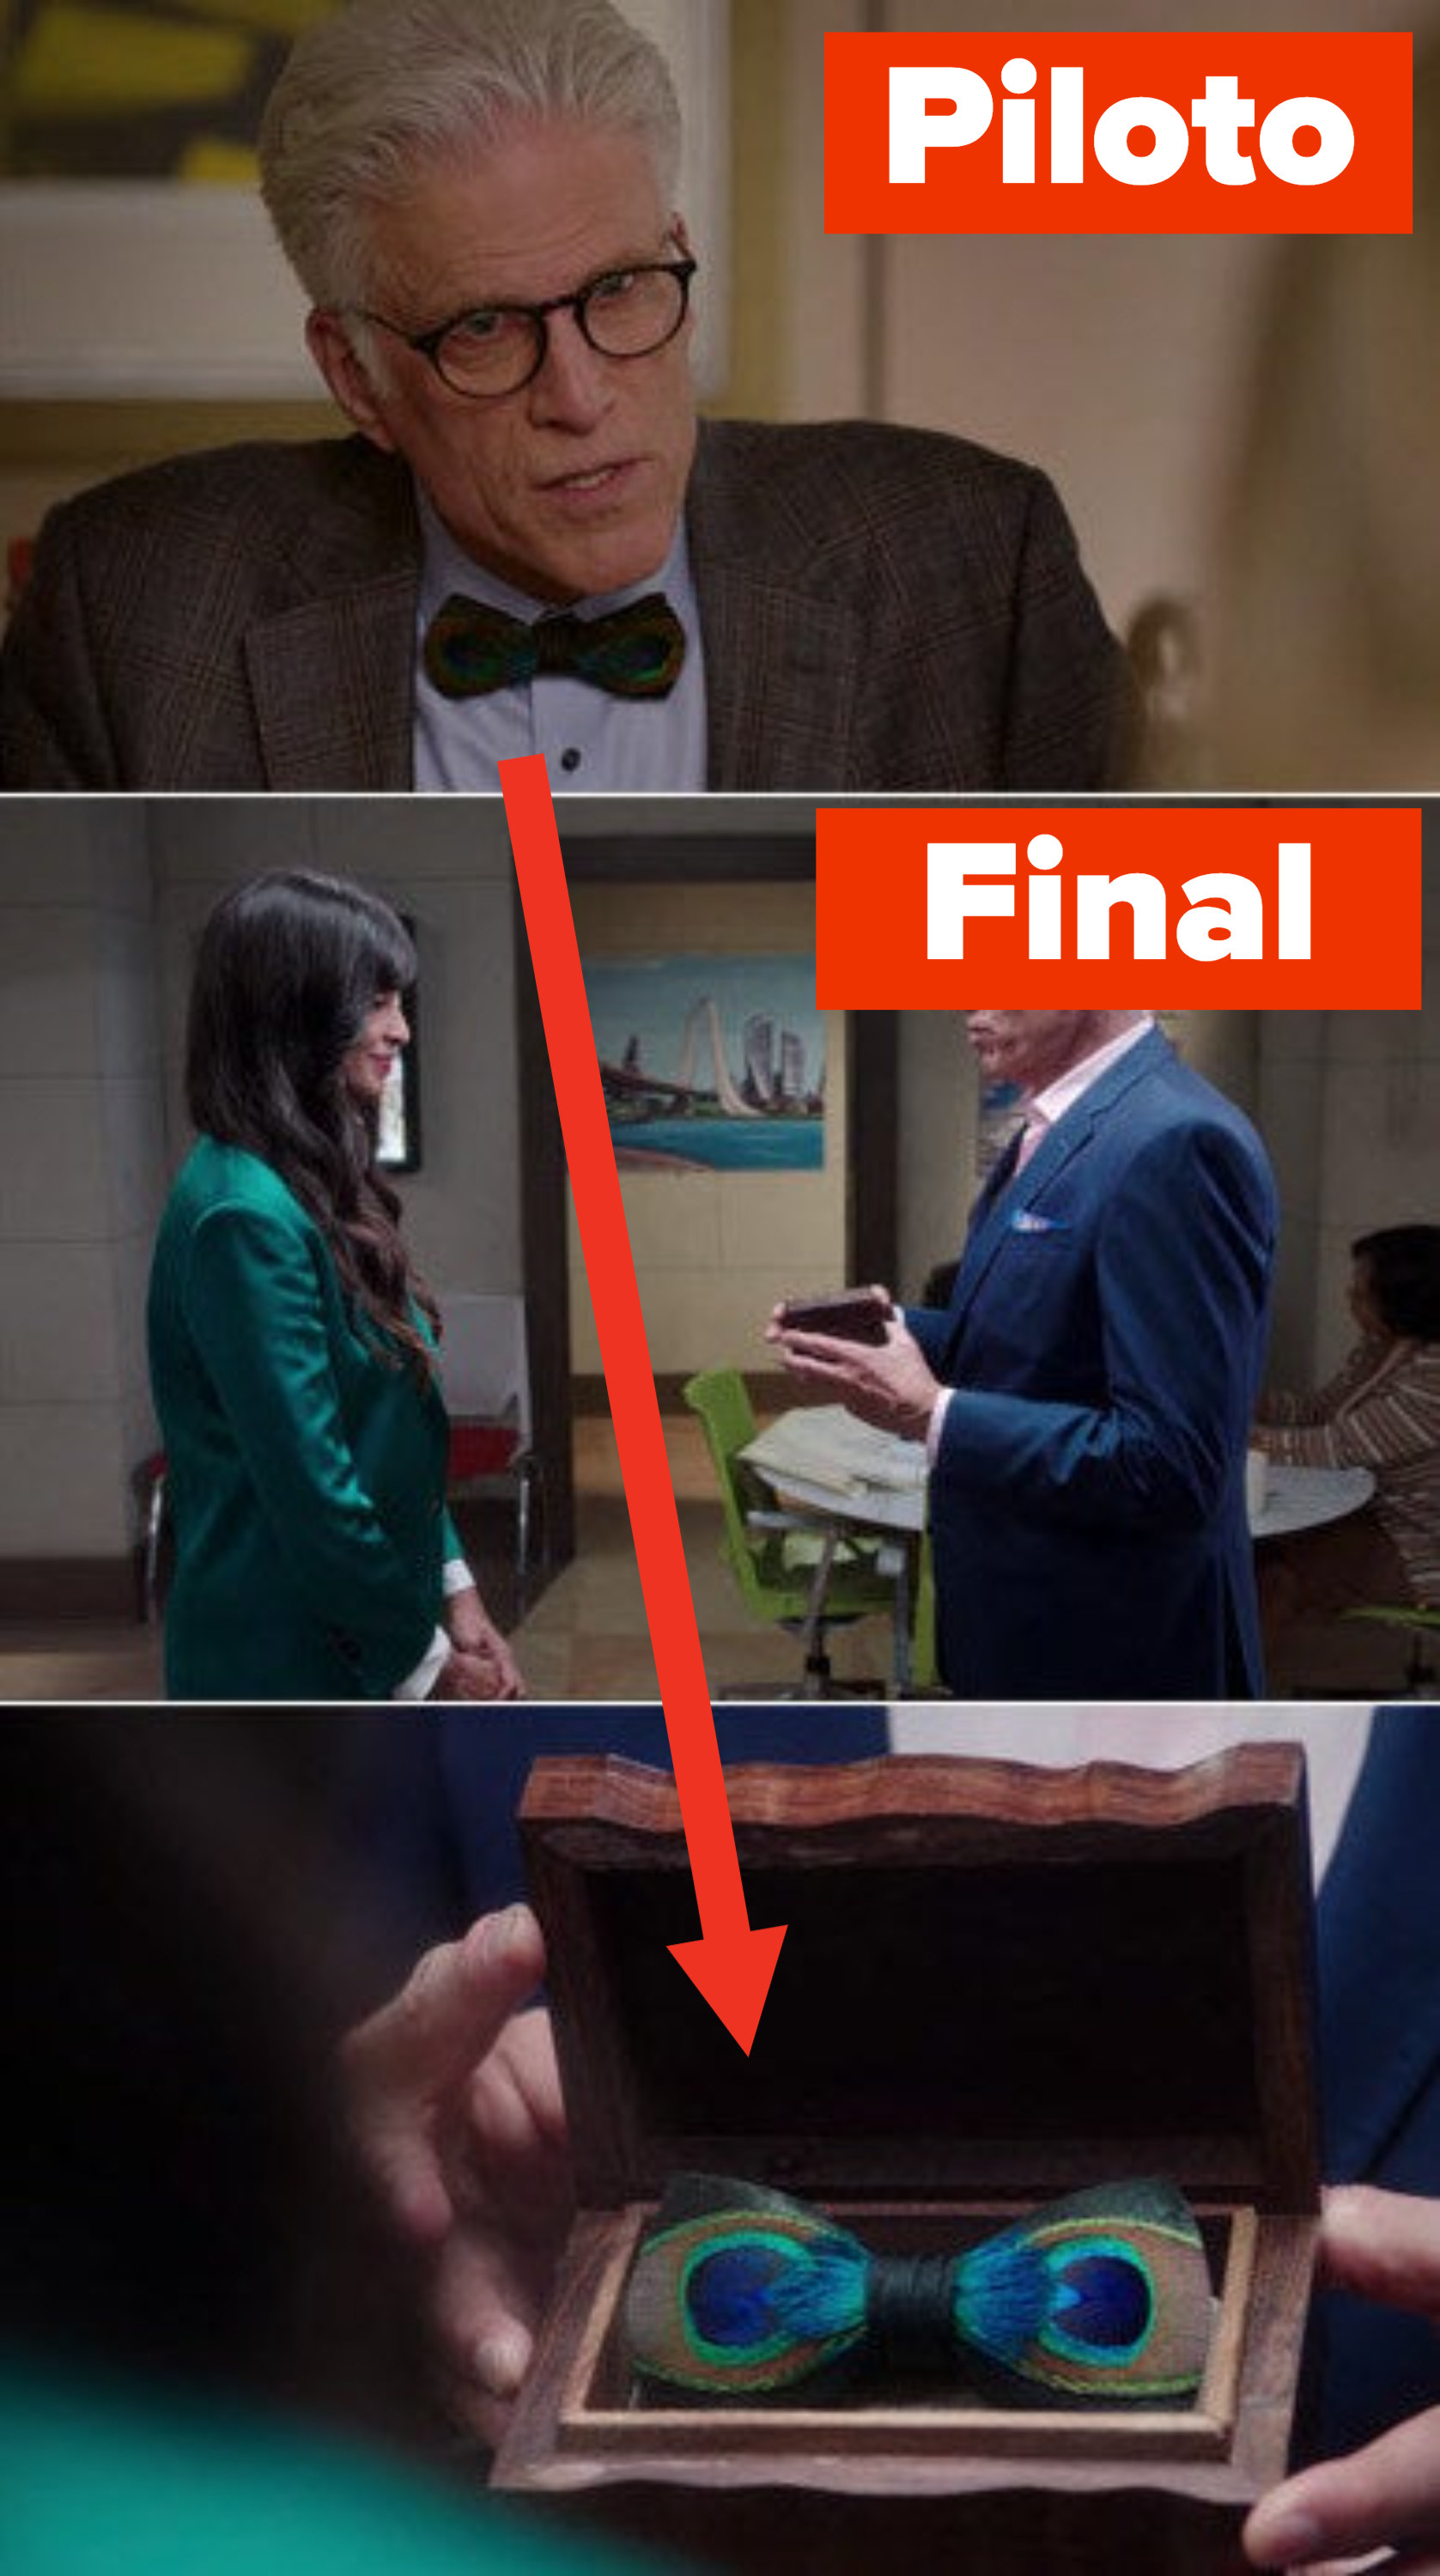 Michael giving Tahani a bowtie and a picture of him wearing the bowtie in the pilot